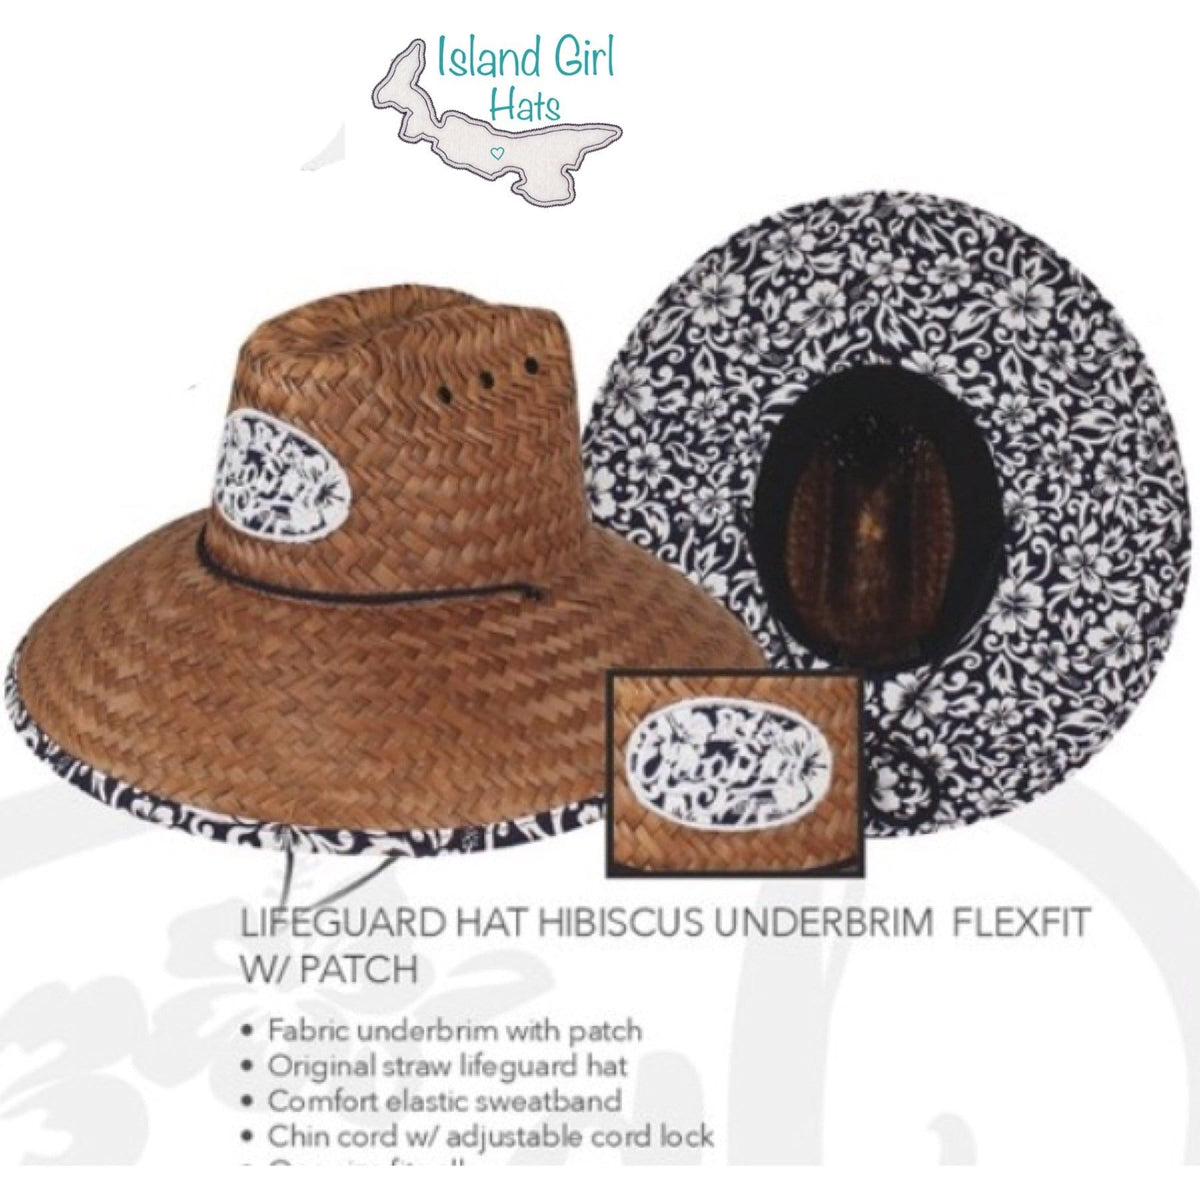 Island Girl Sun Hat One Size / Navy Hibiscus Island Girl Hats / Navy Hibiscus equestrian team apparel online tack store mobile tack store custom farm apparel custom show stable clothing equestrian lifestyle horse show clothing riding clothes horses equestrian tack store